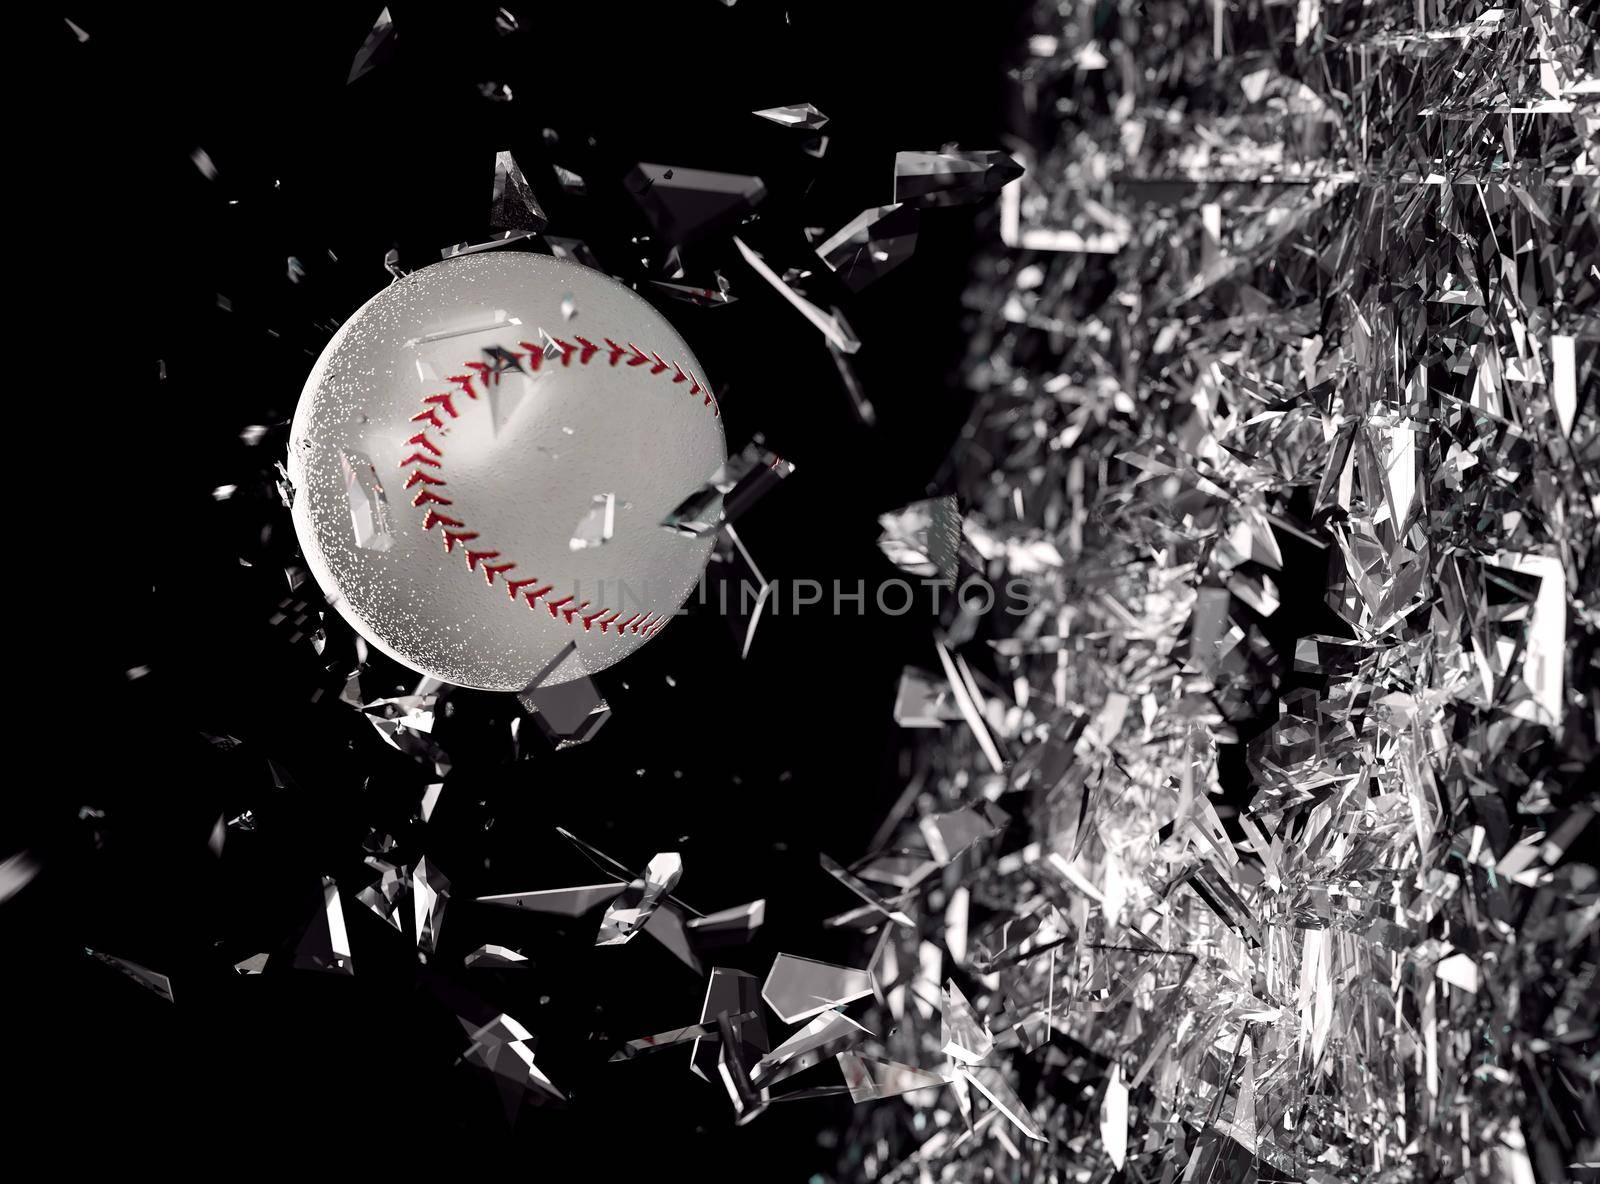 Baseball ball in motion breaking the glass.Concept of action and strength in team sport